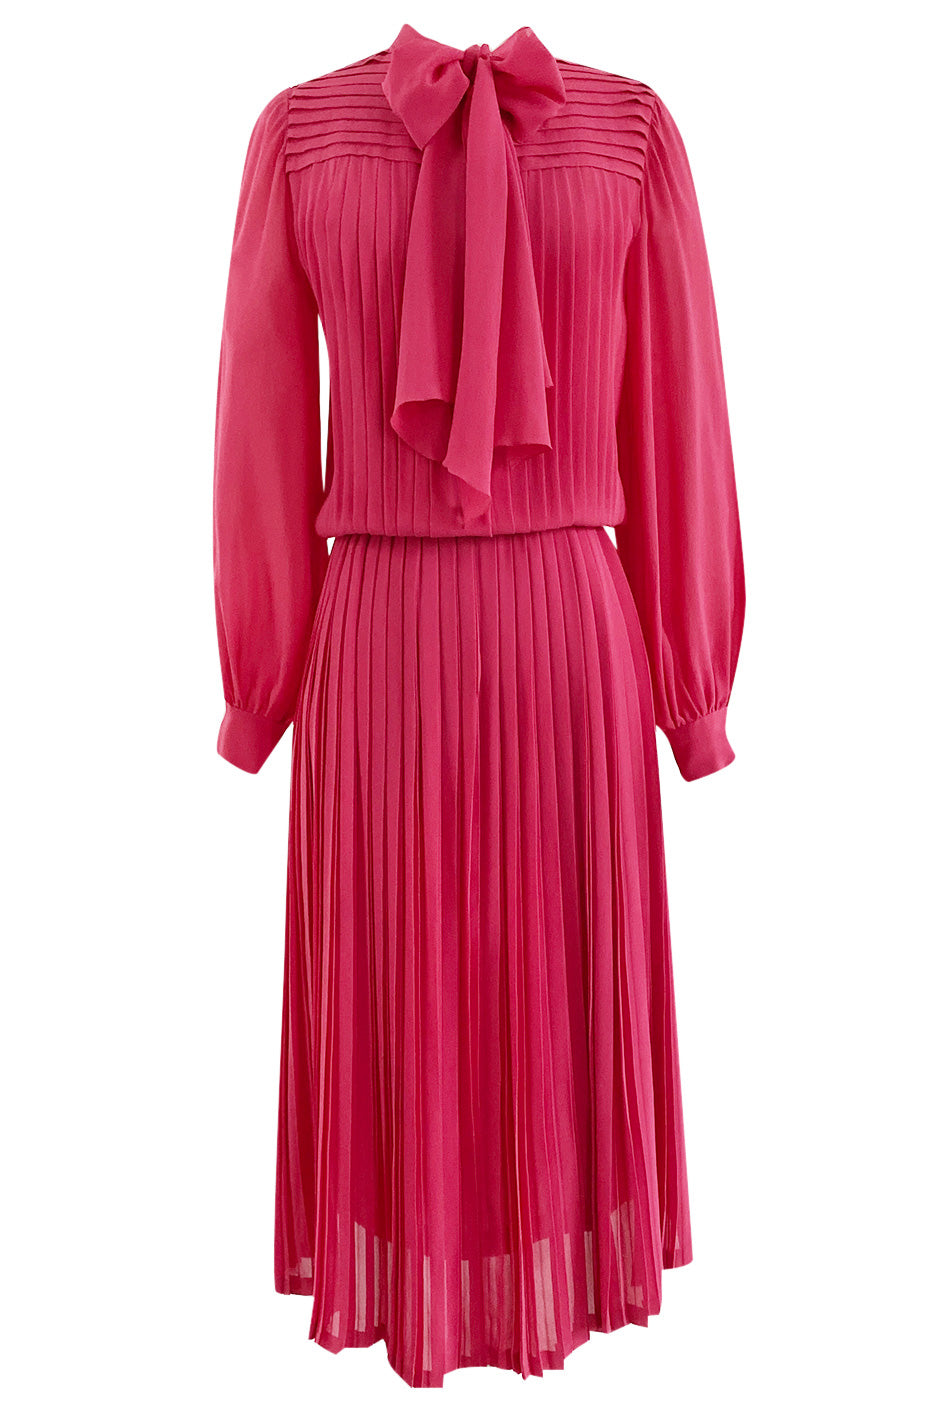 1970s Louis Feraud Haute Couture Hand Pleated Pink Silk Chiffon Day Dr ...